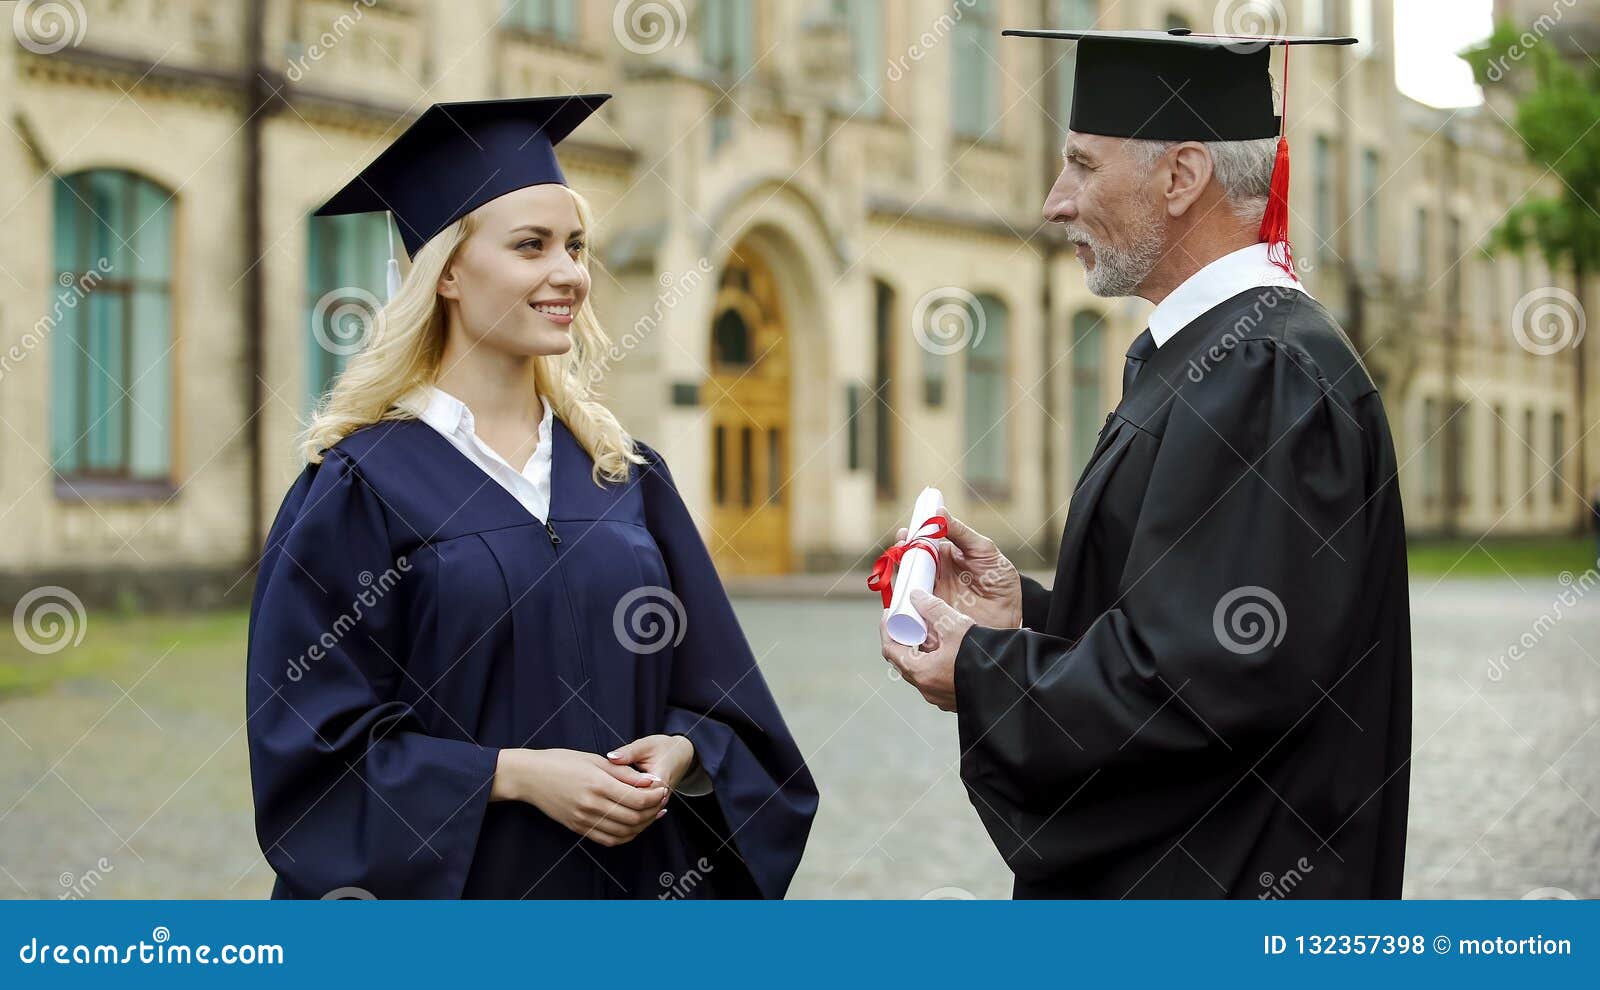 chancellor of university giving diploma to graduating student, successful future